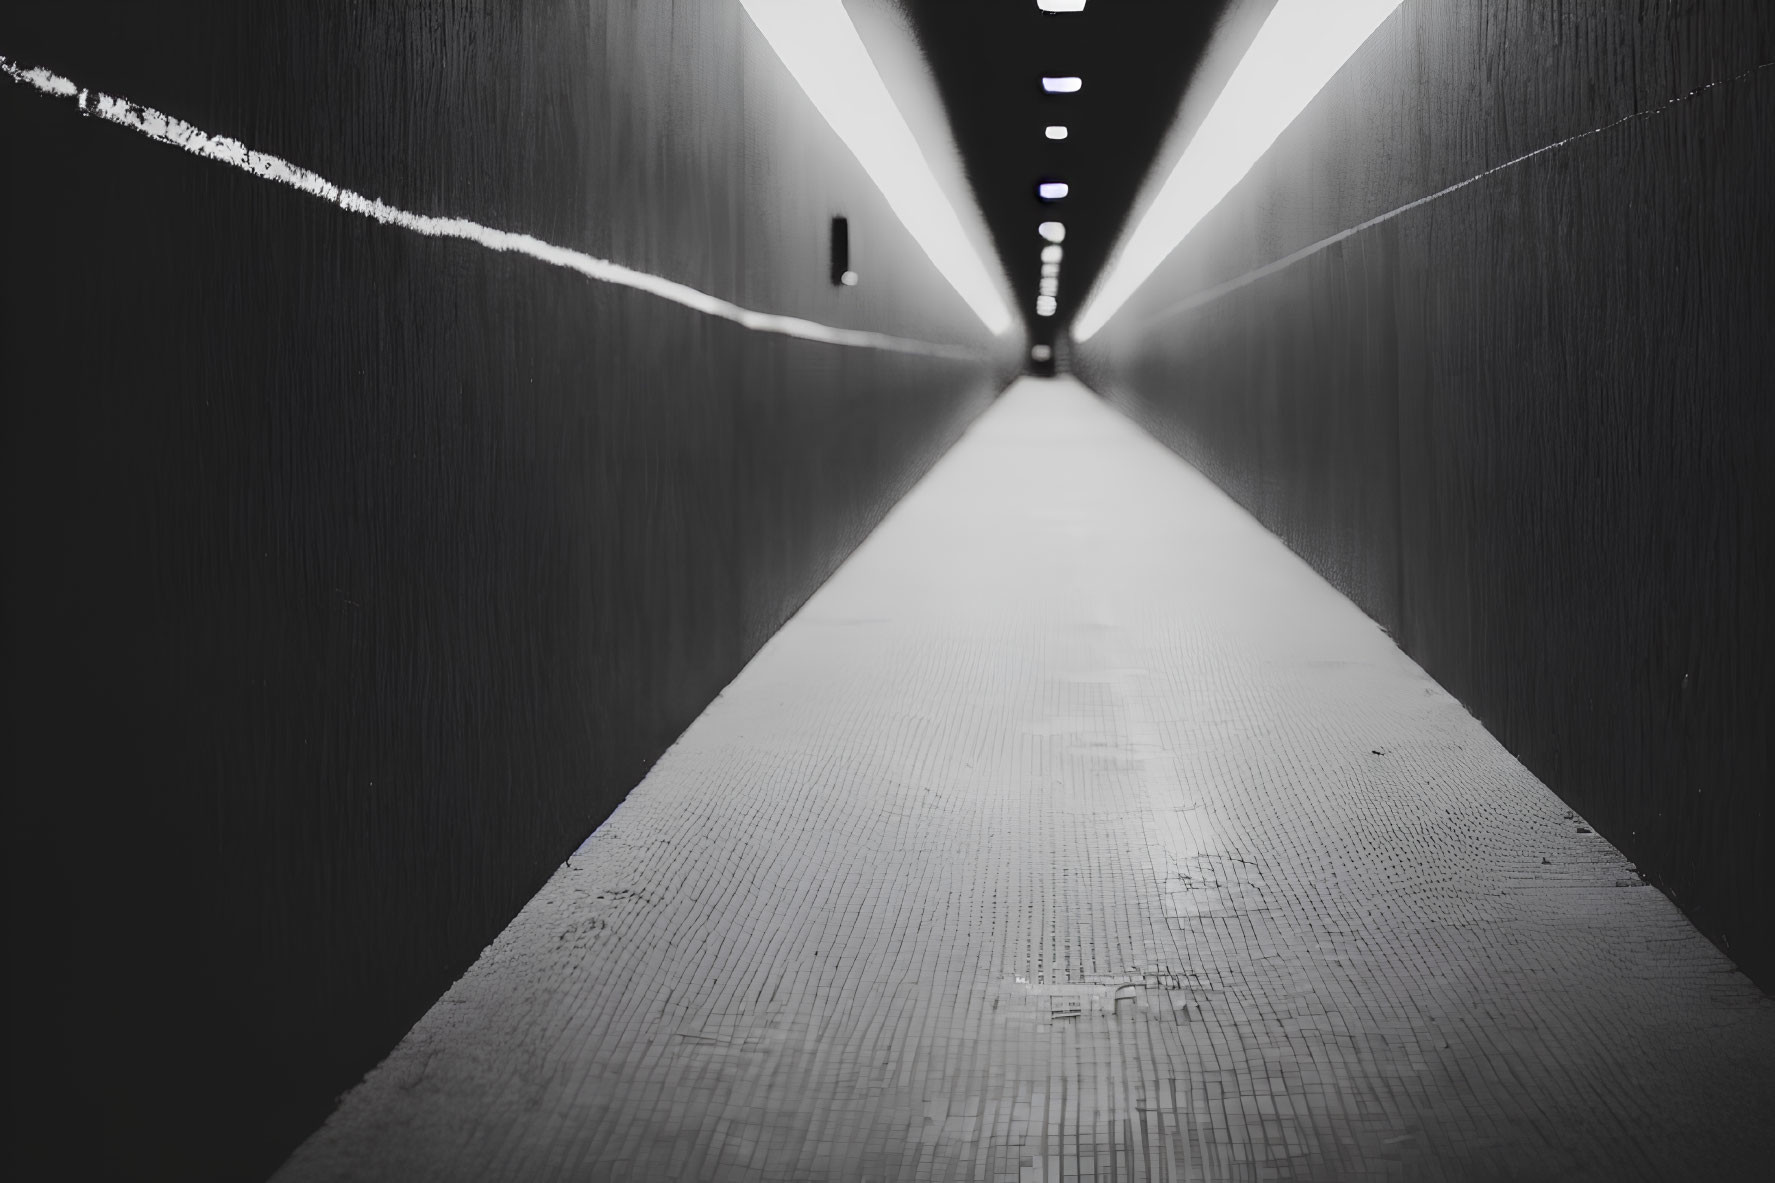 Monochrome photo of long, narrow corridor with bright overhead light strip and reflective floor